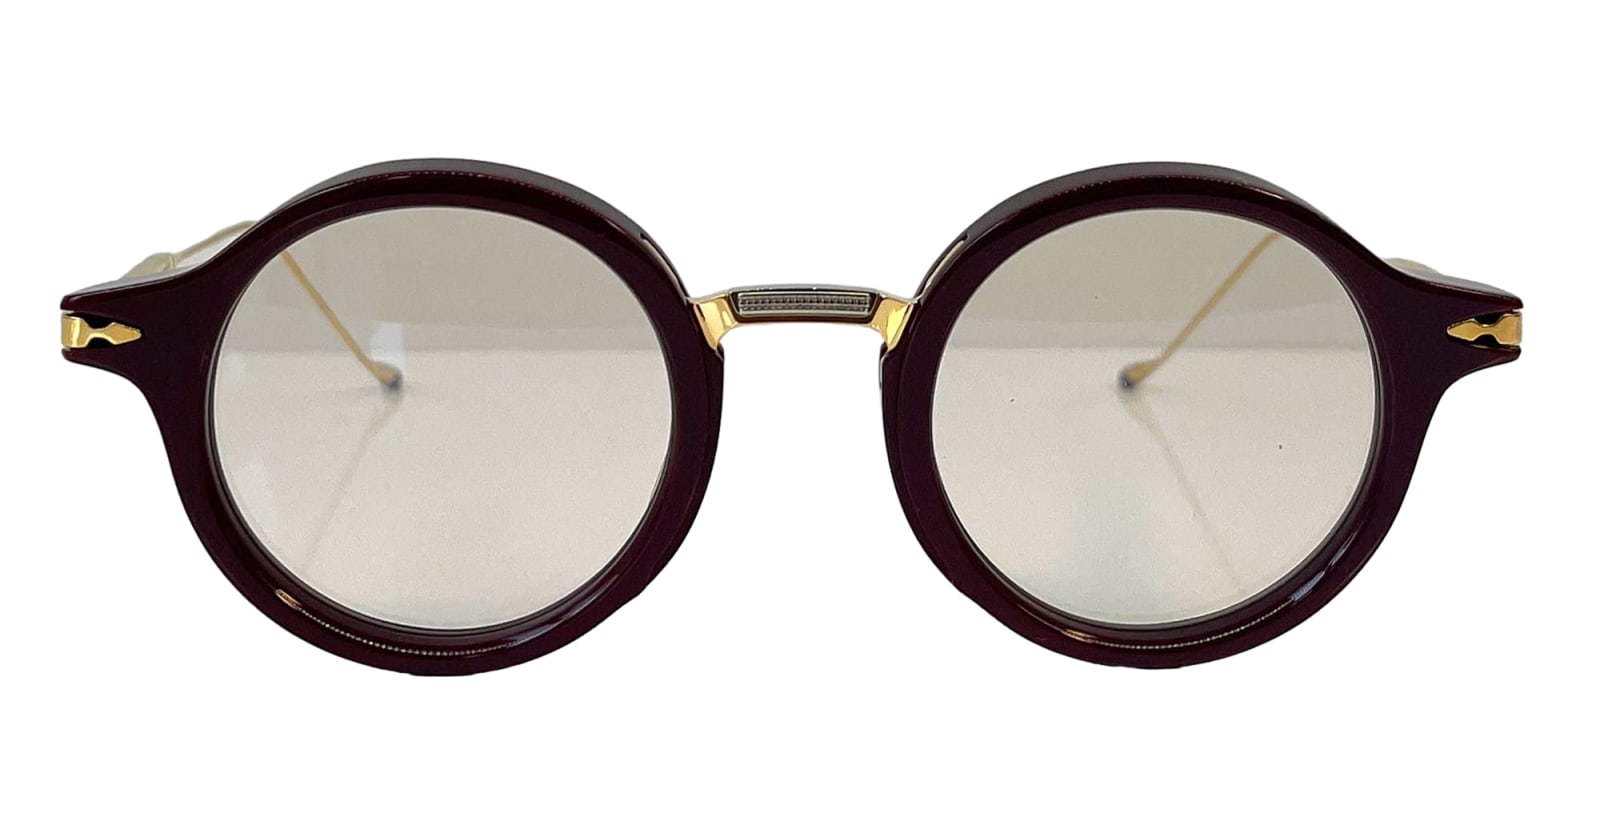 JACQUES MARIE MAGE NORMAN - RESERVE RX GLASSES